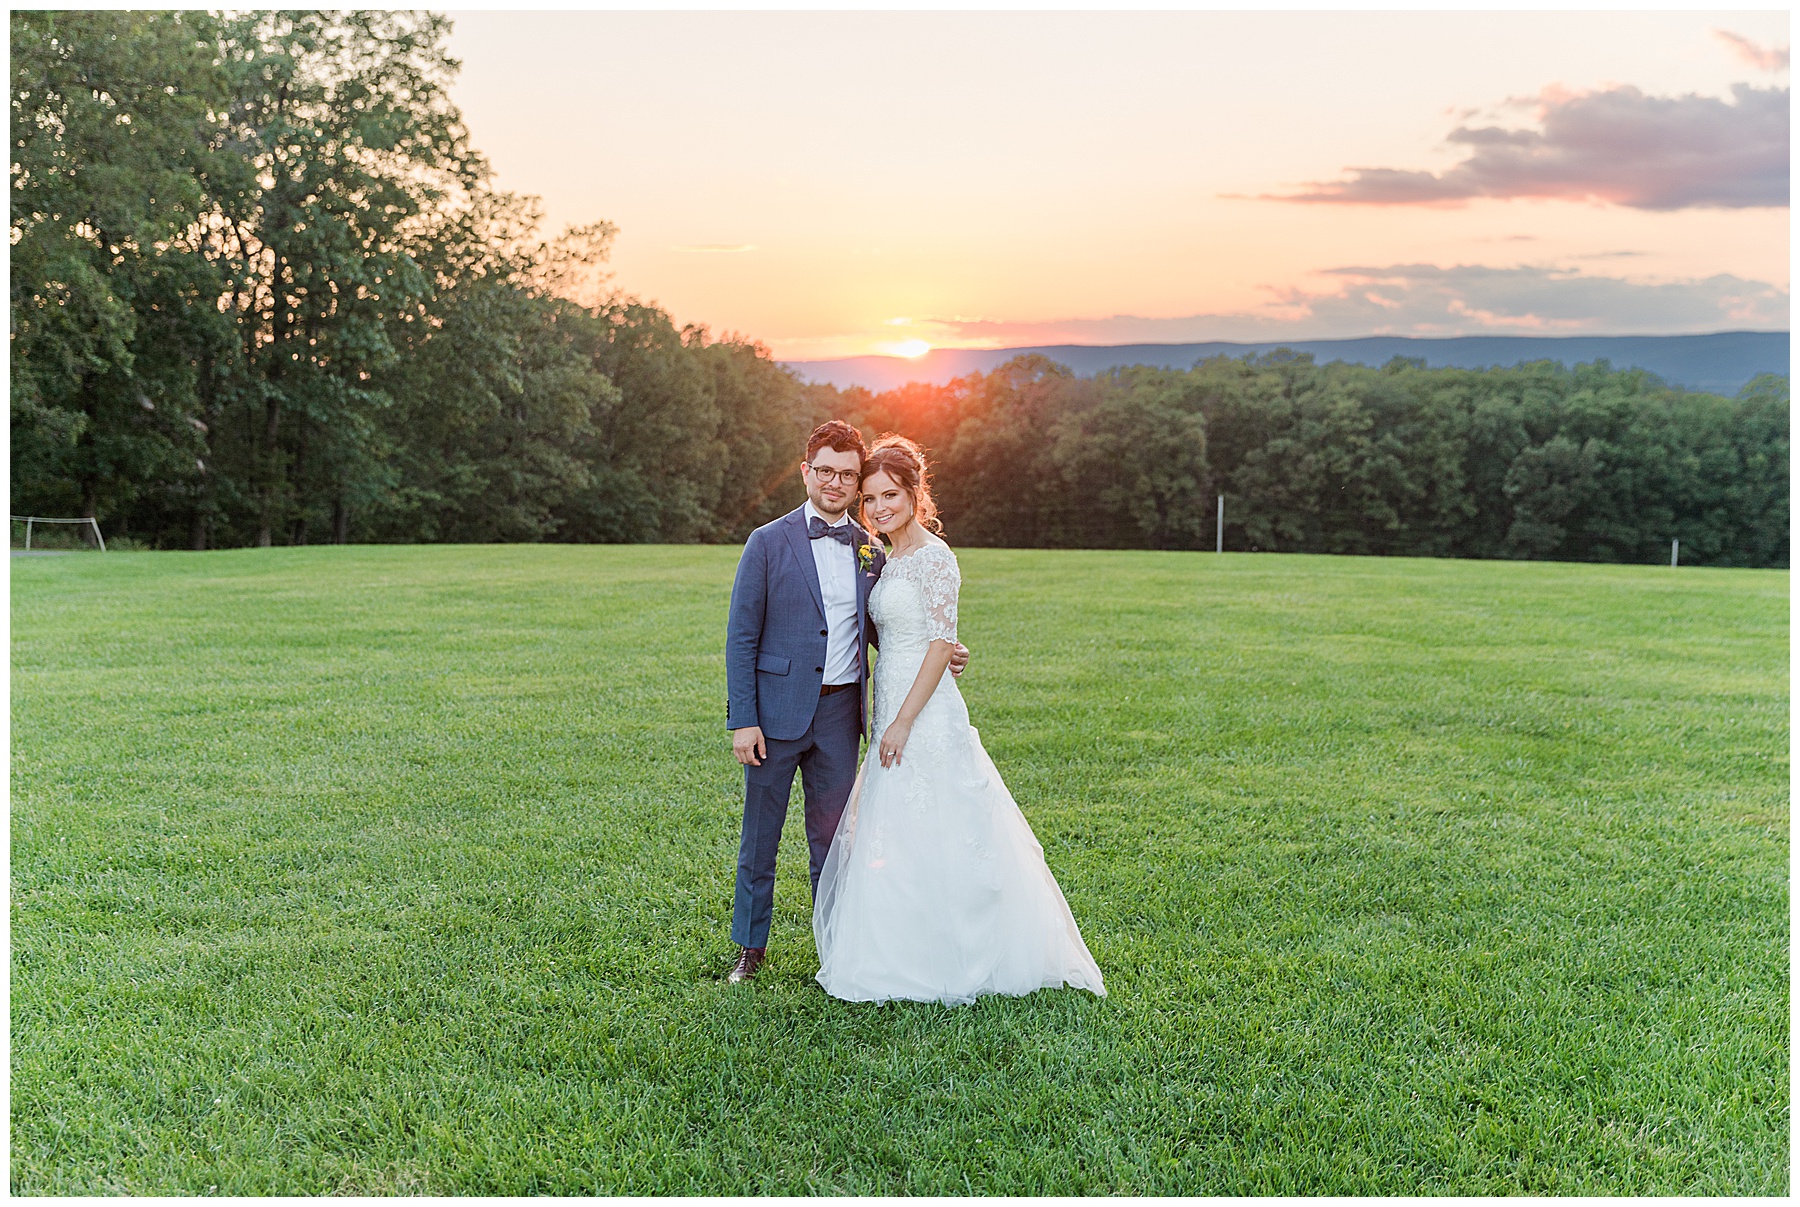 Rachel & Esteban's Wedding | Dulany's Overlook | Frederick, MD | Taylord Southern Events